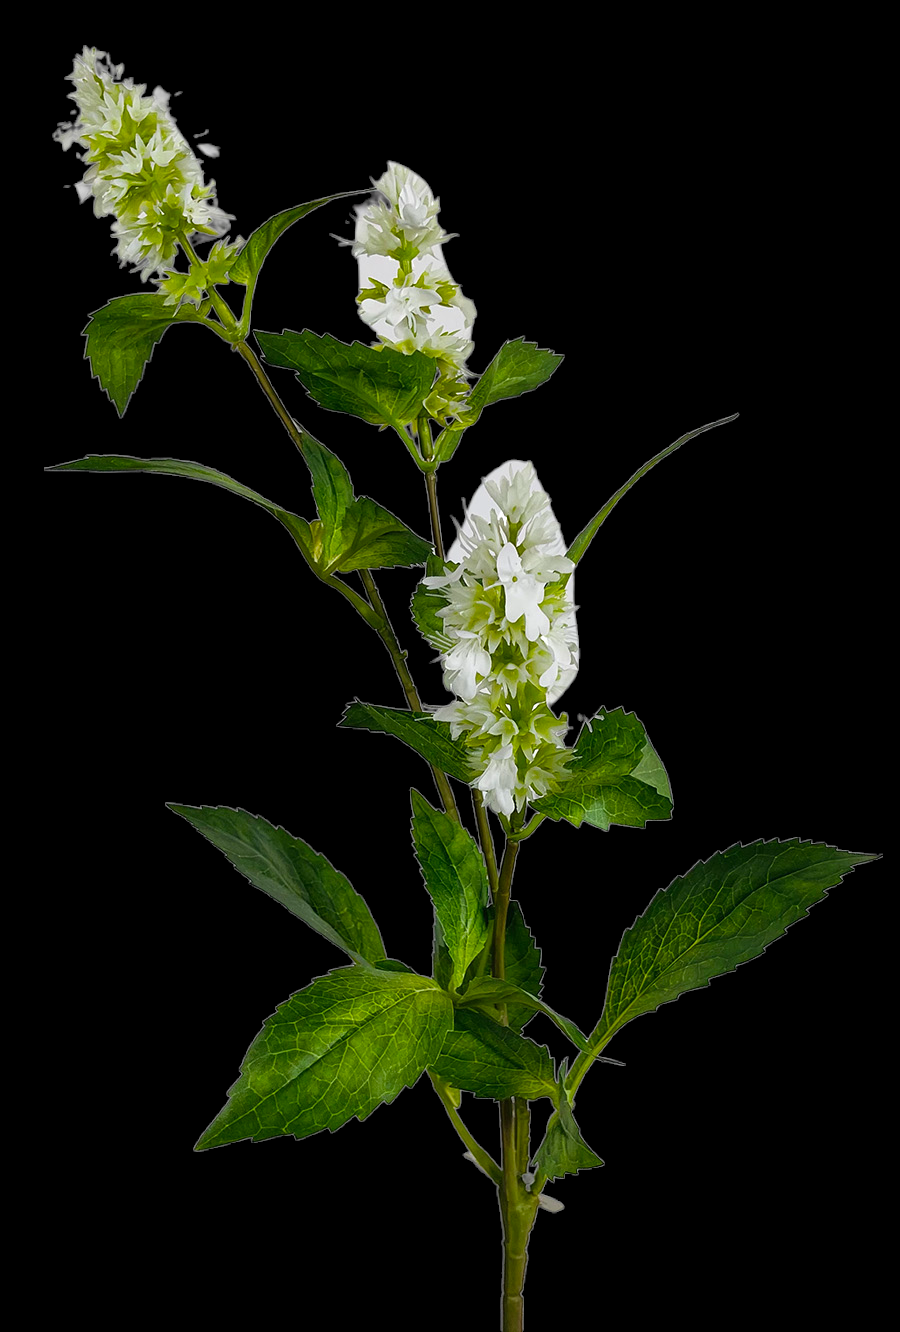 White Blooming Mint Branch
22"